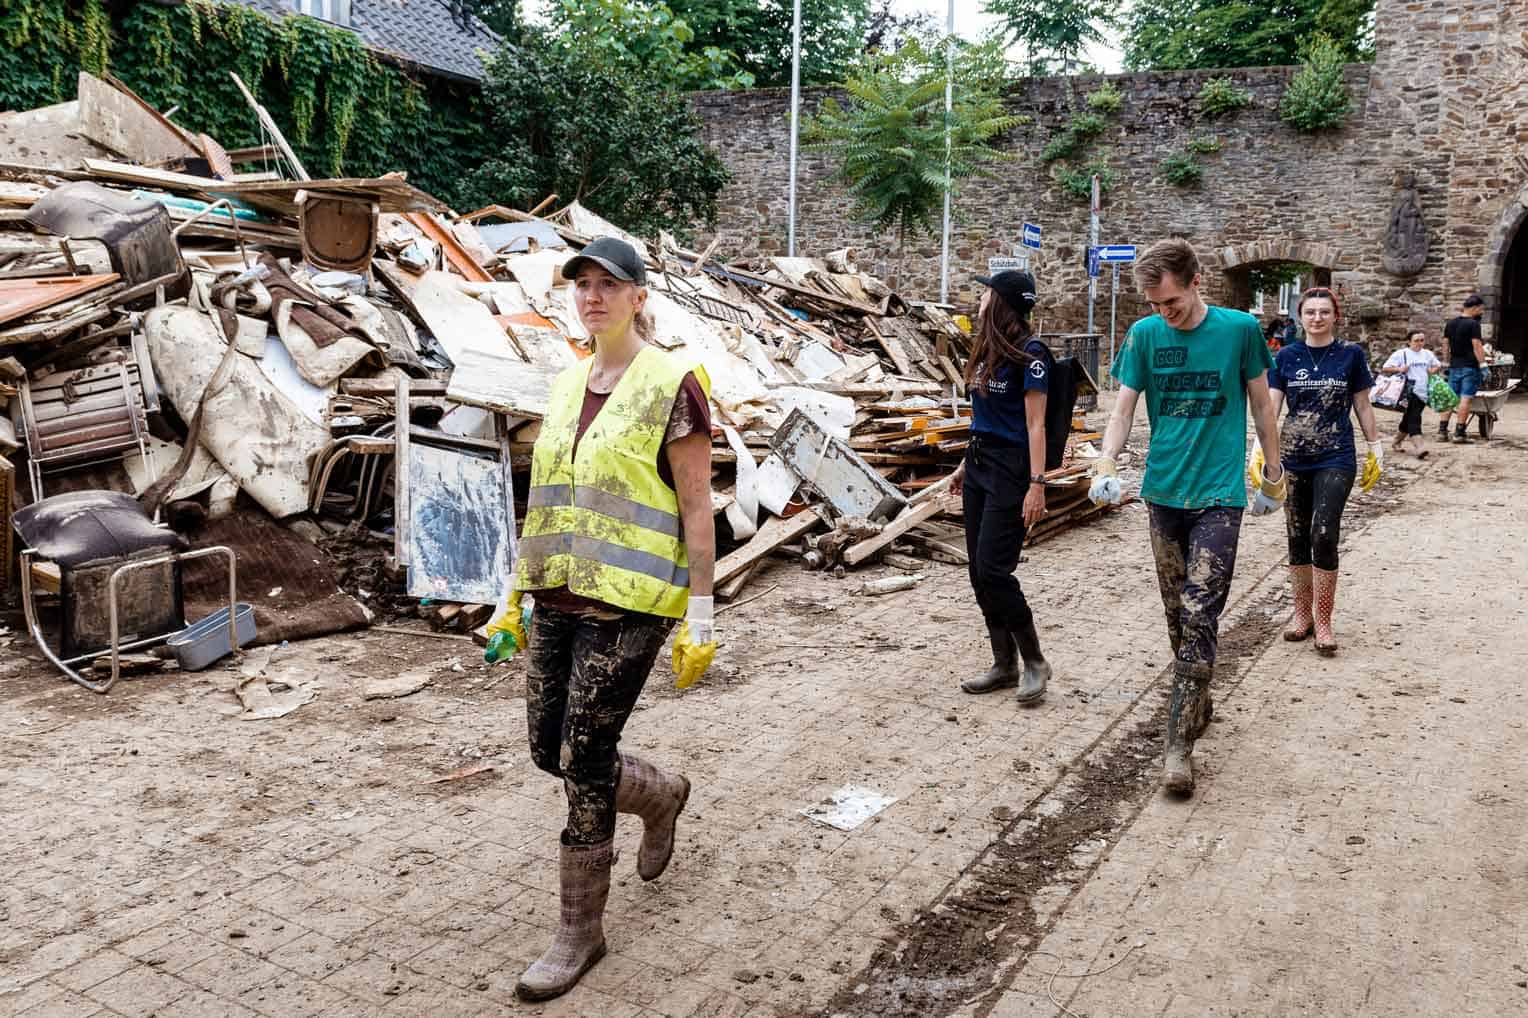 While debris piles up on the streets of Ahrweiler, Christian and Esther Giller (right) and other volunteers are there to share the hope of Jesus Christ.